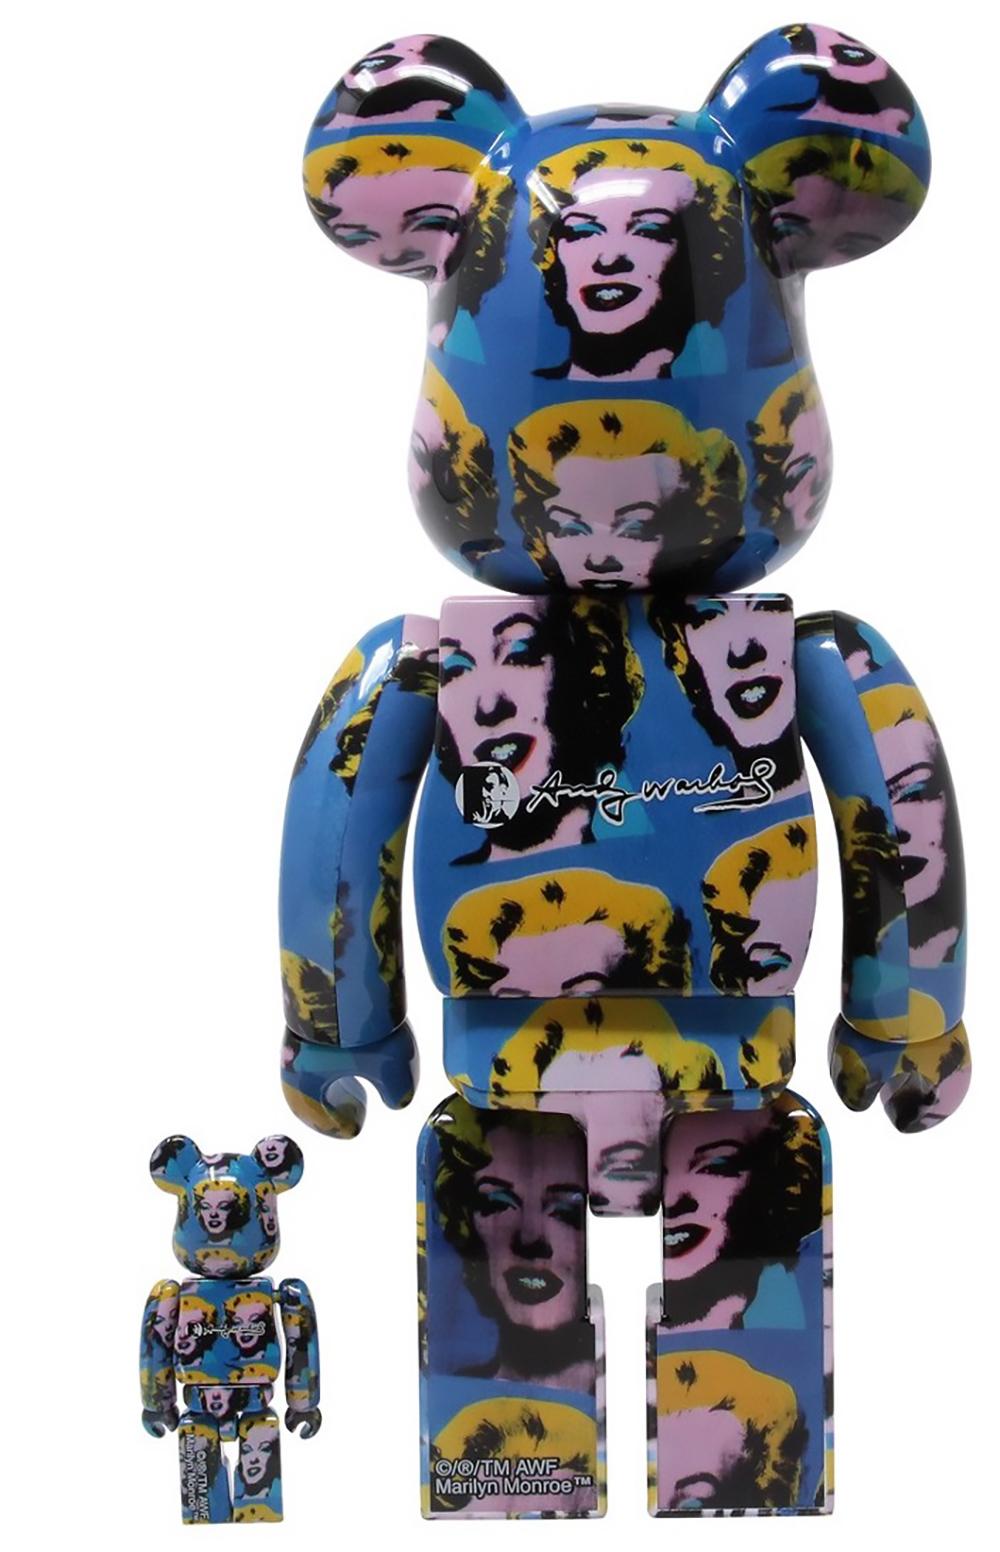 Andy Warhol Bearbrick 400% set of 4 works (Warhol BE@RBRICK) - Gray Figurative Sculpture by (after) Andy Warhol